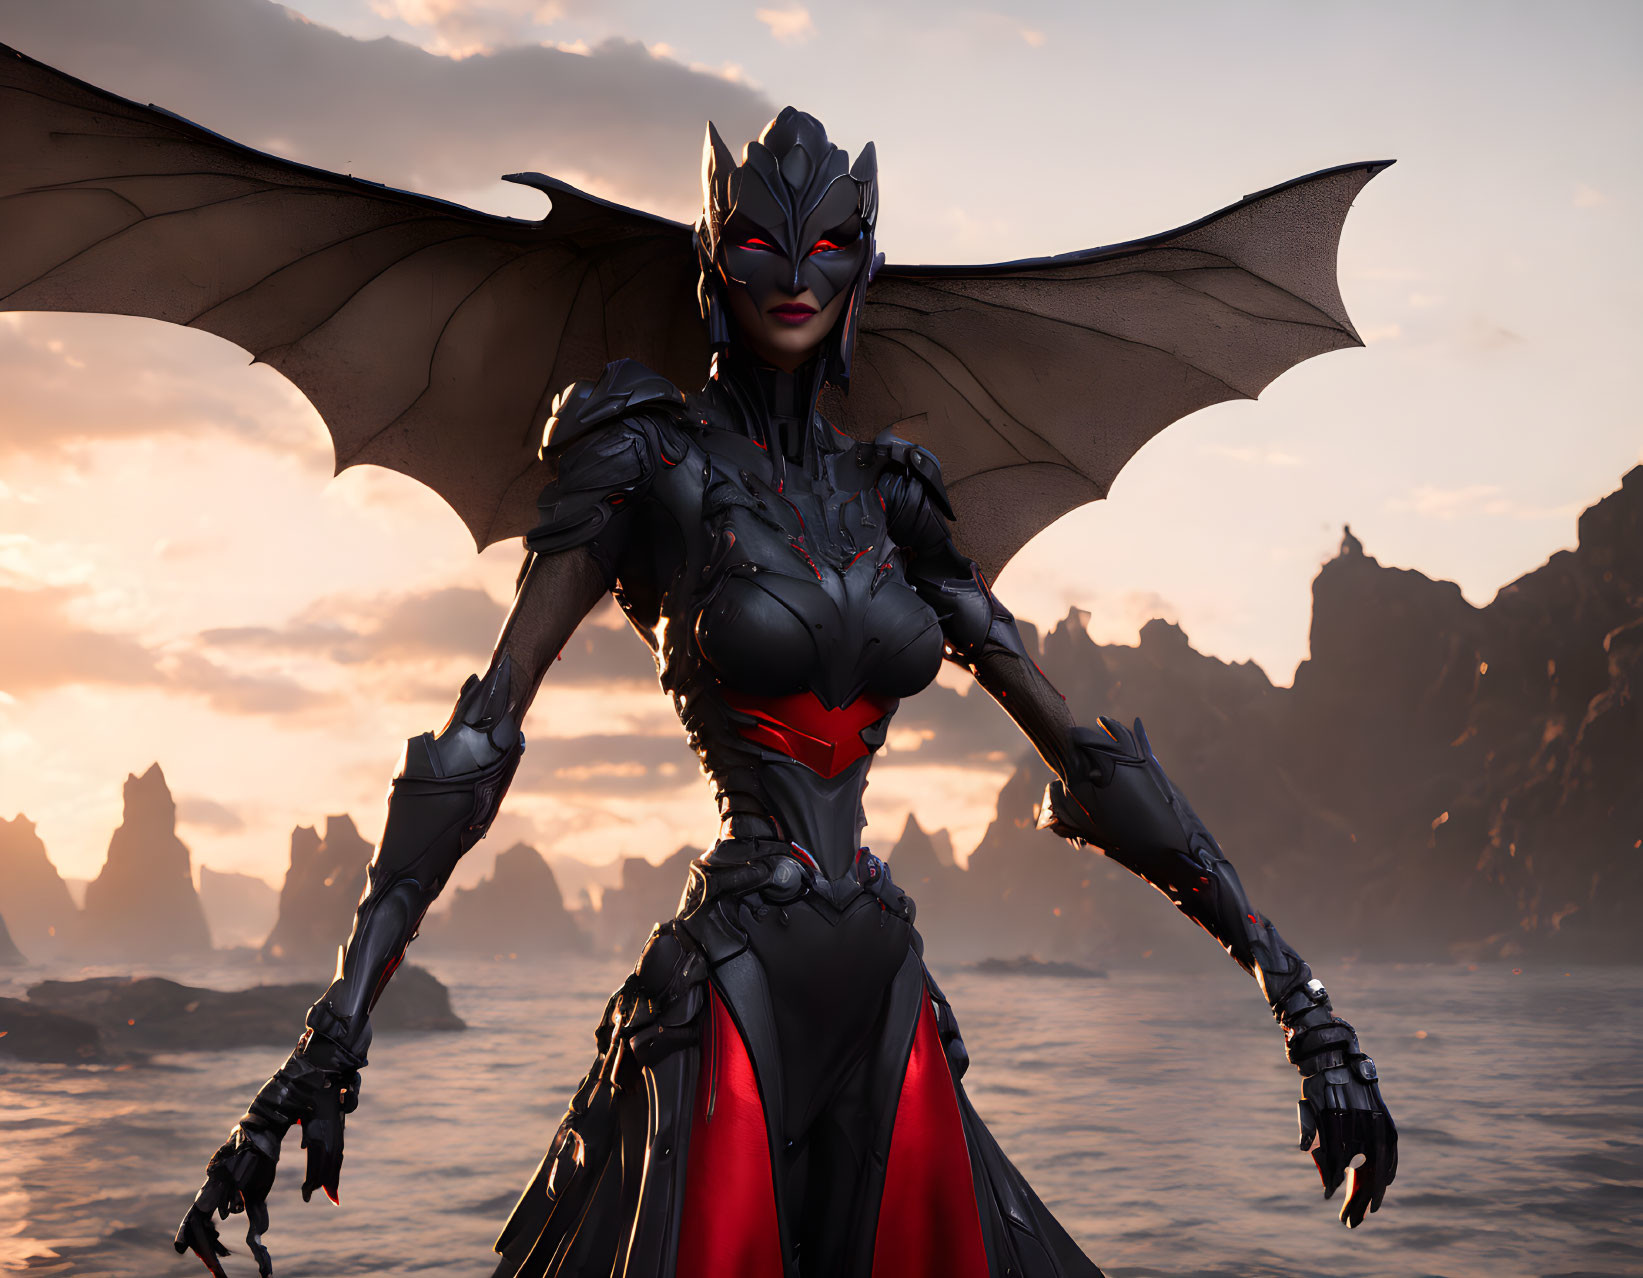 Female character with bat-like wings in armored suit against dramatic sunset backdrop